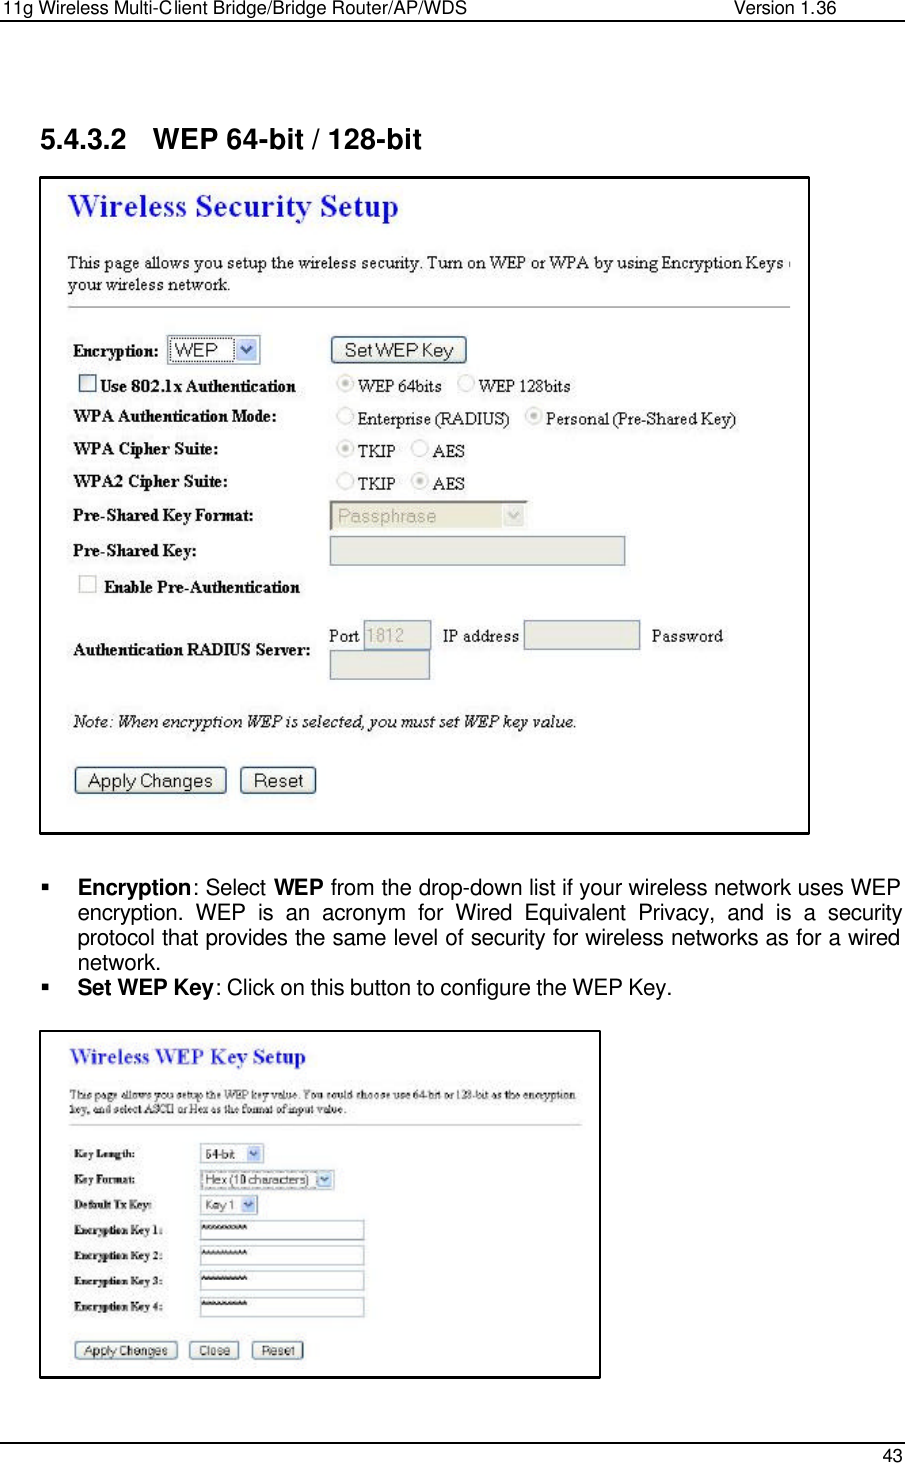 11g Wireless Multi-Client Bridge/Bridge Router/AP/WDS                                                   Version 1.36    43    5.4.3.2 WEP 64-bit / 128-bit                          § Encryption: Select WEP from the drop-down list if your wireless network uses WEP encryption. WEP is an acronym for Wired Equivalent Privacy, and is a security protocol that provides the same level of security for wireless networks as for a wired network.  § Set WEP Key: Click on this button to configure the WEP Key.                   